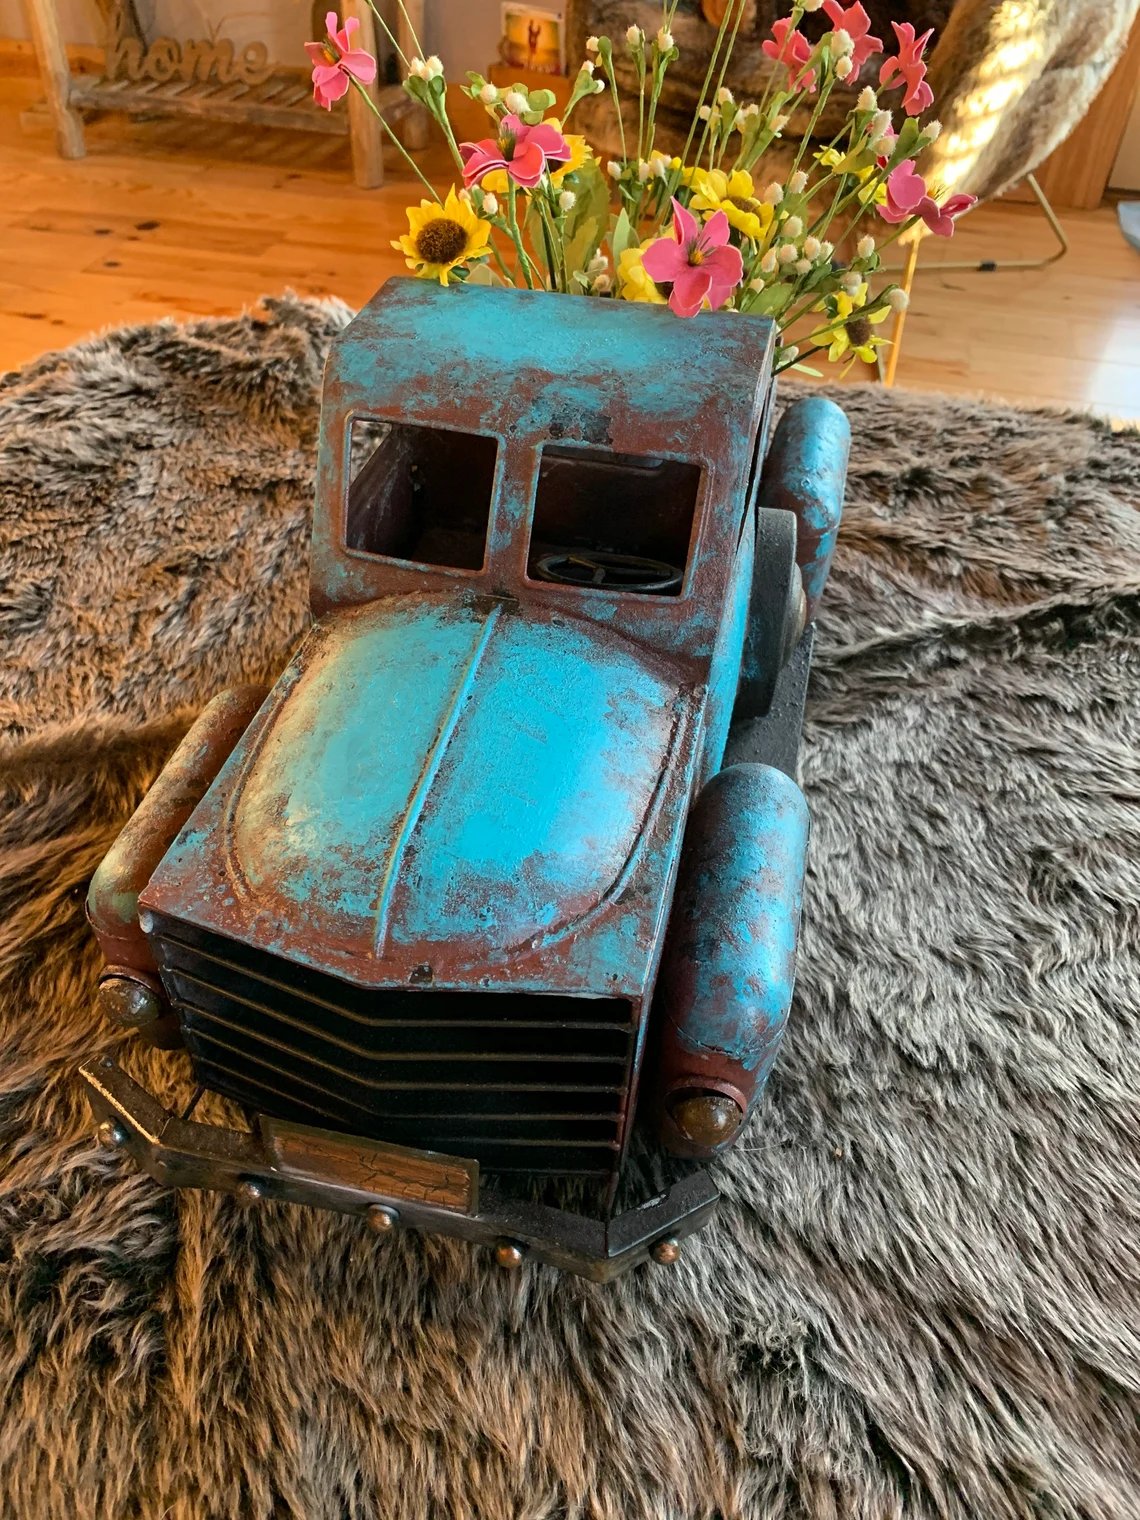 🎁Spring Easter Hot Sale 45%OFF💝Spring Summer Large rustic farmhouse Truck